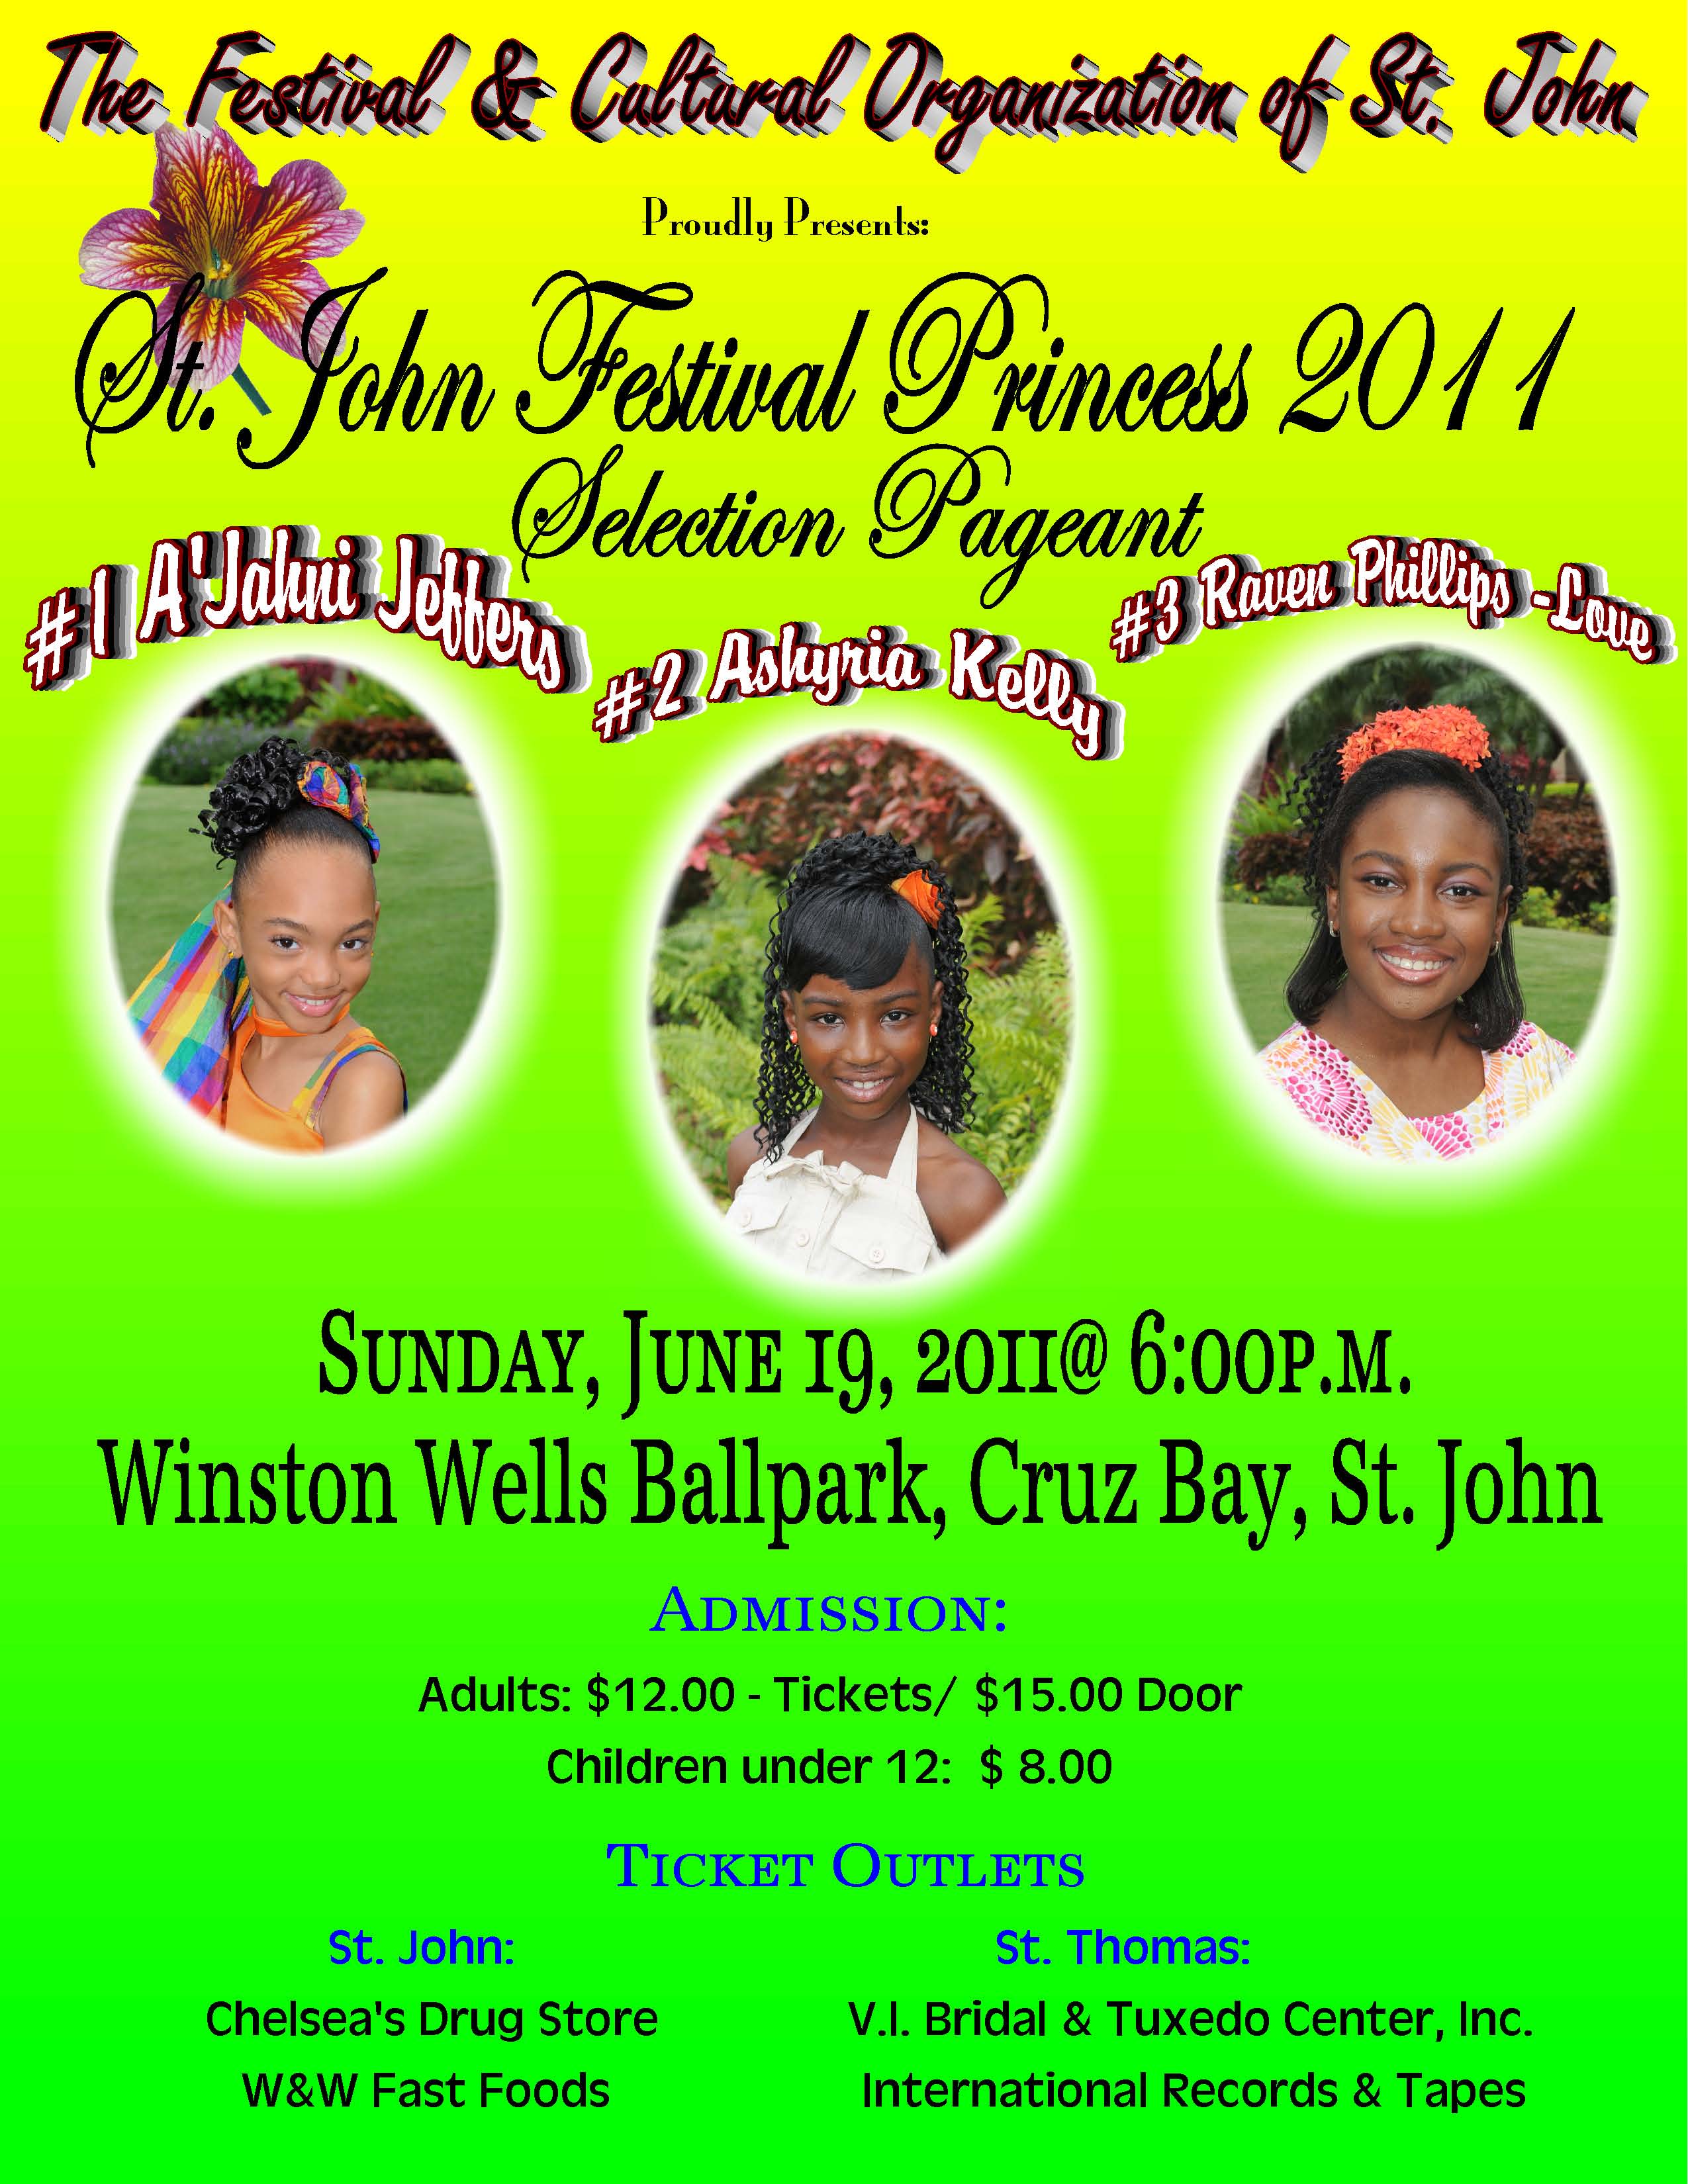 St. John's young ladies will vie for the title of Festival Princess on June 19.